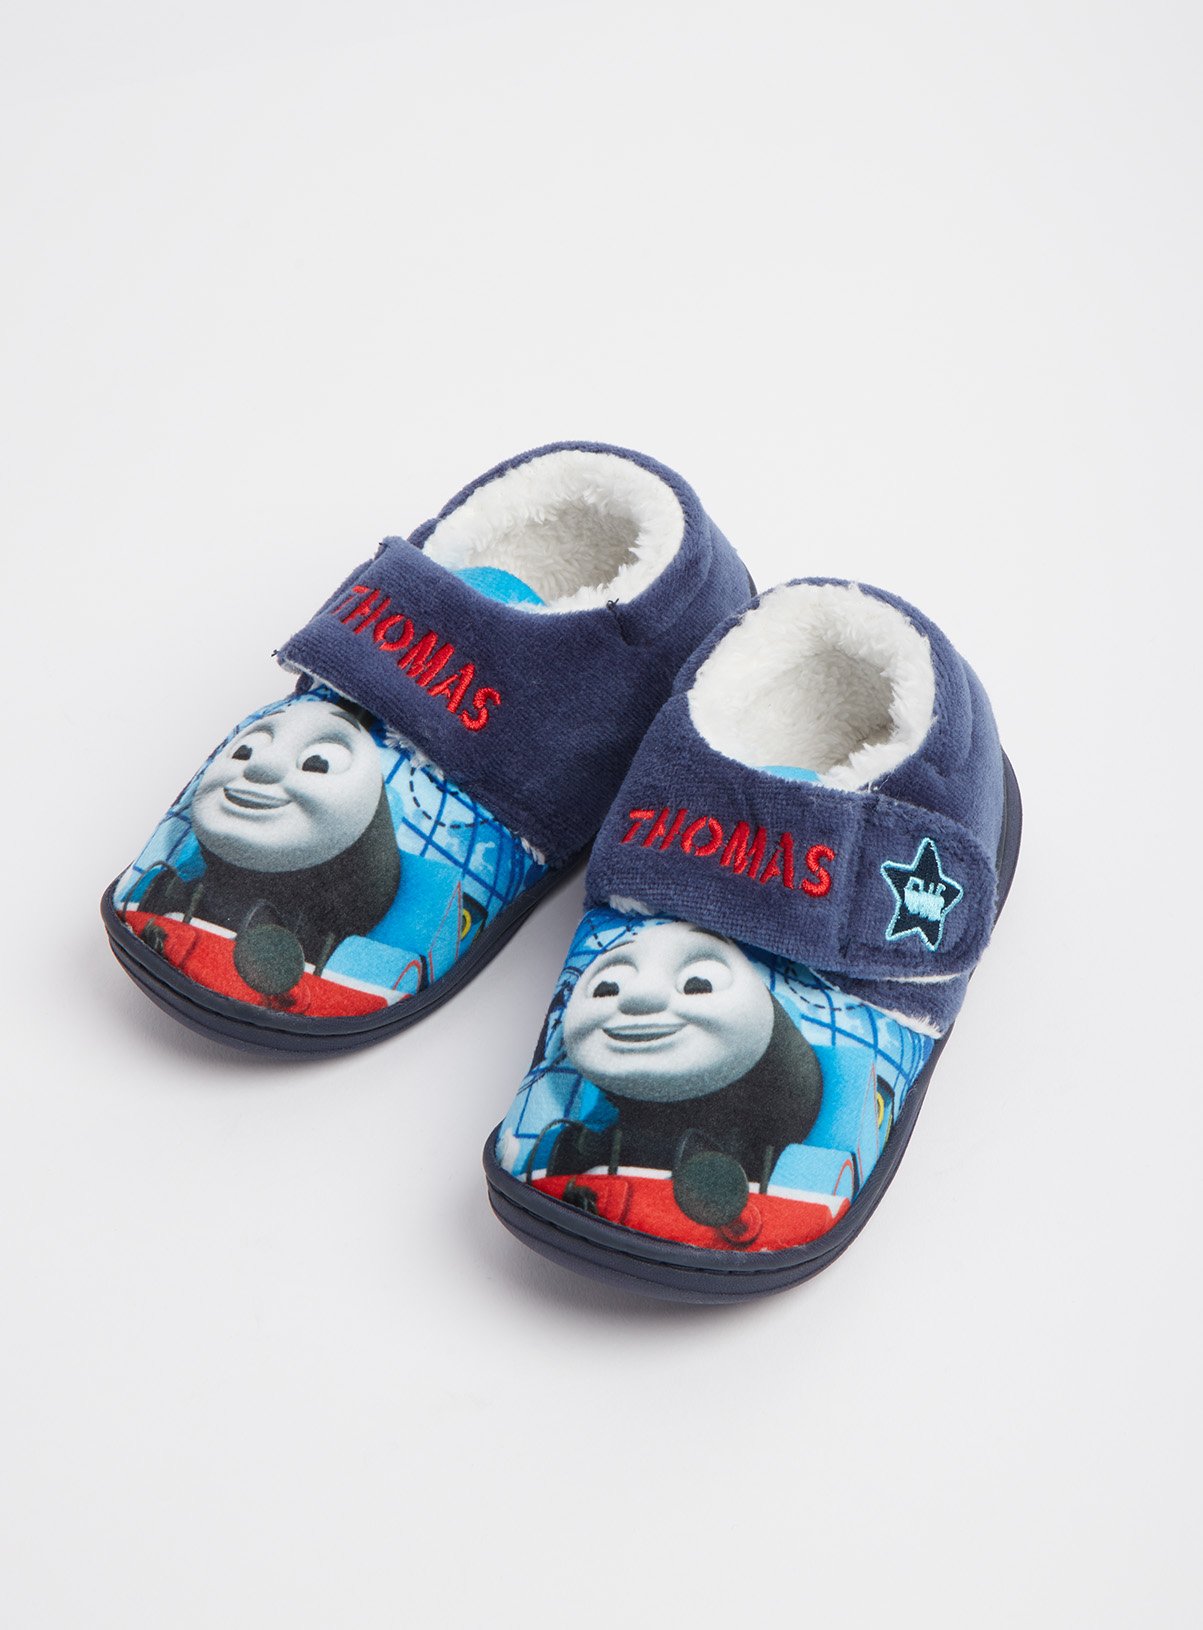 Thomas & Friends Blue Full Slippers Review